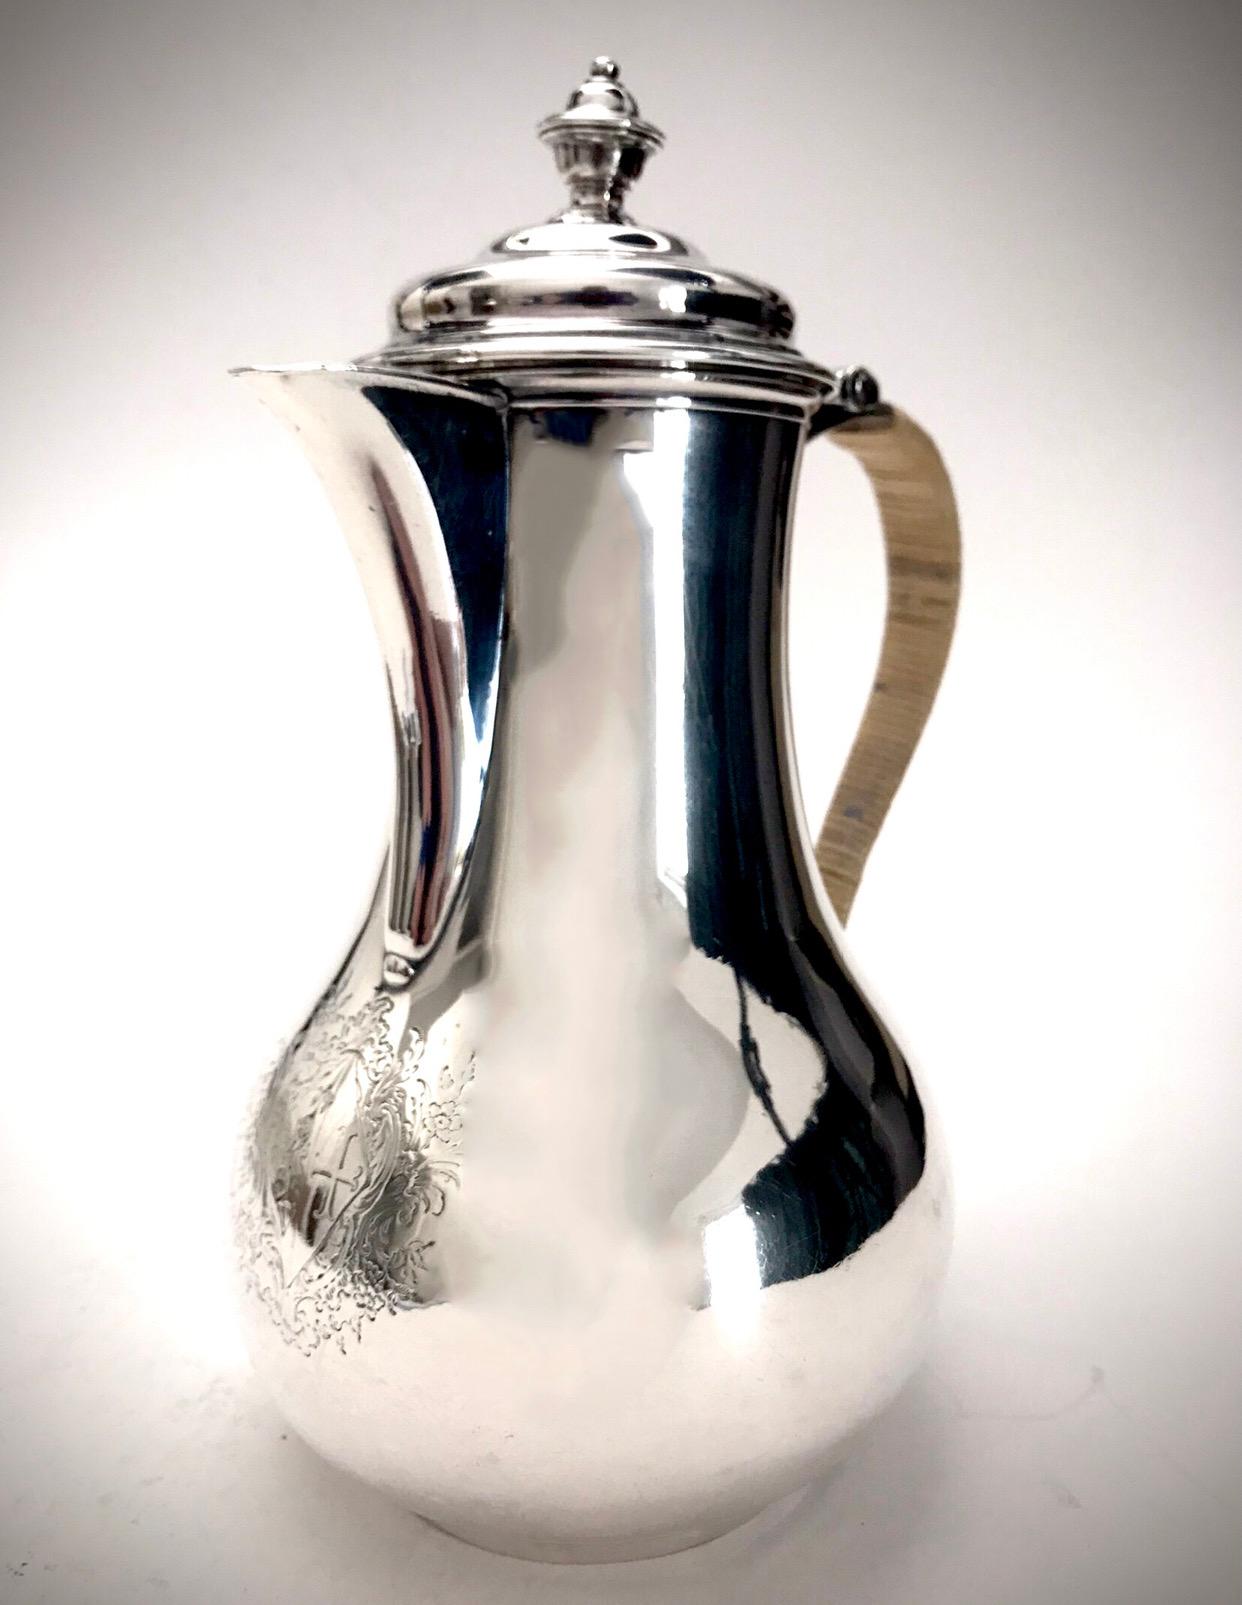 A Rare and magnificent mid 18th century Jug by the famous London Silversmith Paul De Lamerie.

With an armorial crest to the front a classical De Lamerie shape.

Hallmarked for London 1750
Weight 635 grams 
Height 23.5 cm

Paul de Lamerie  was the